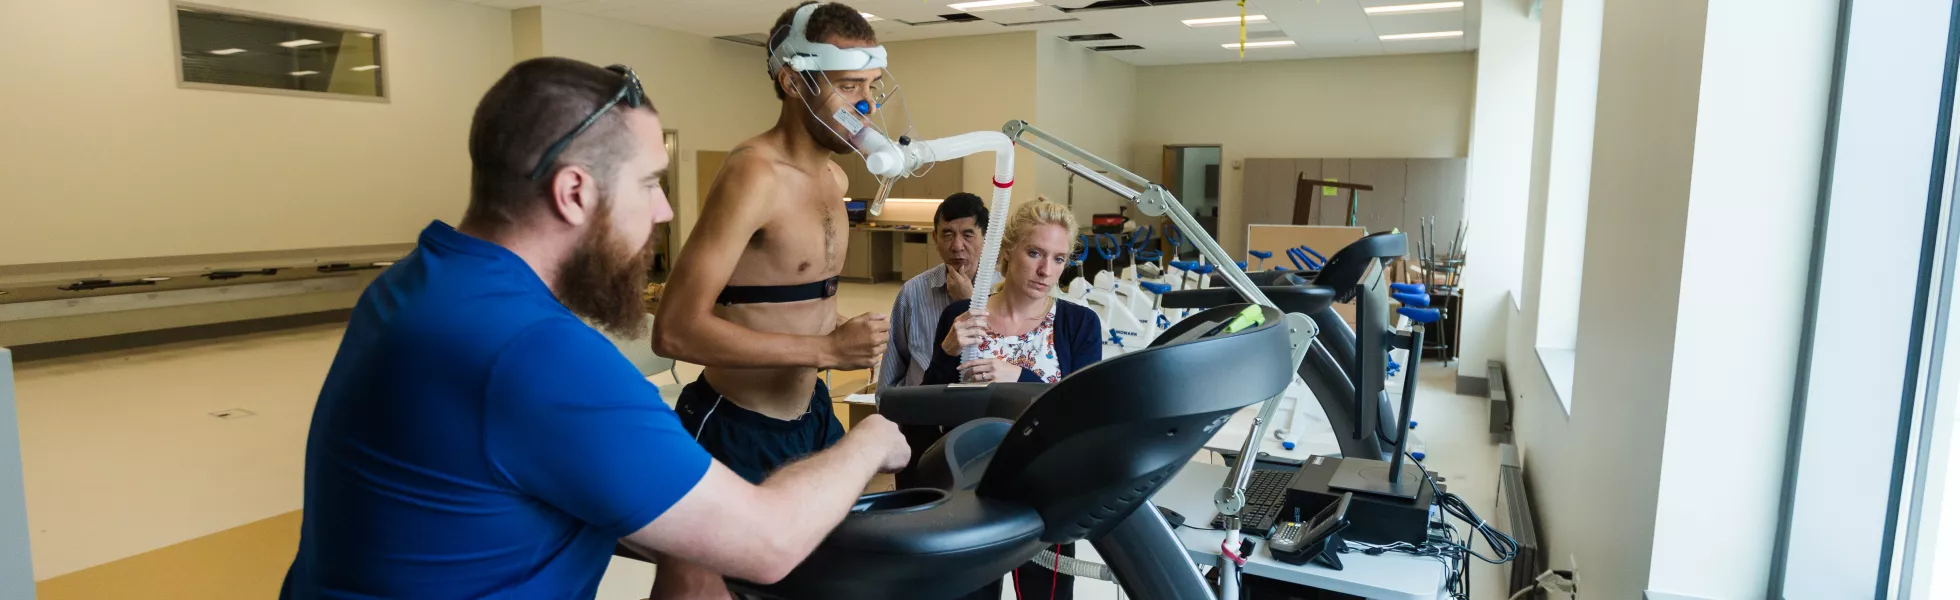 A person with devices attached to their head runs on a treadmill while three others look on, monitoring their vital signs.